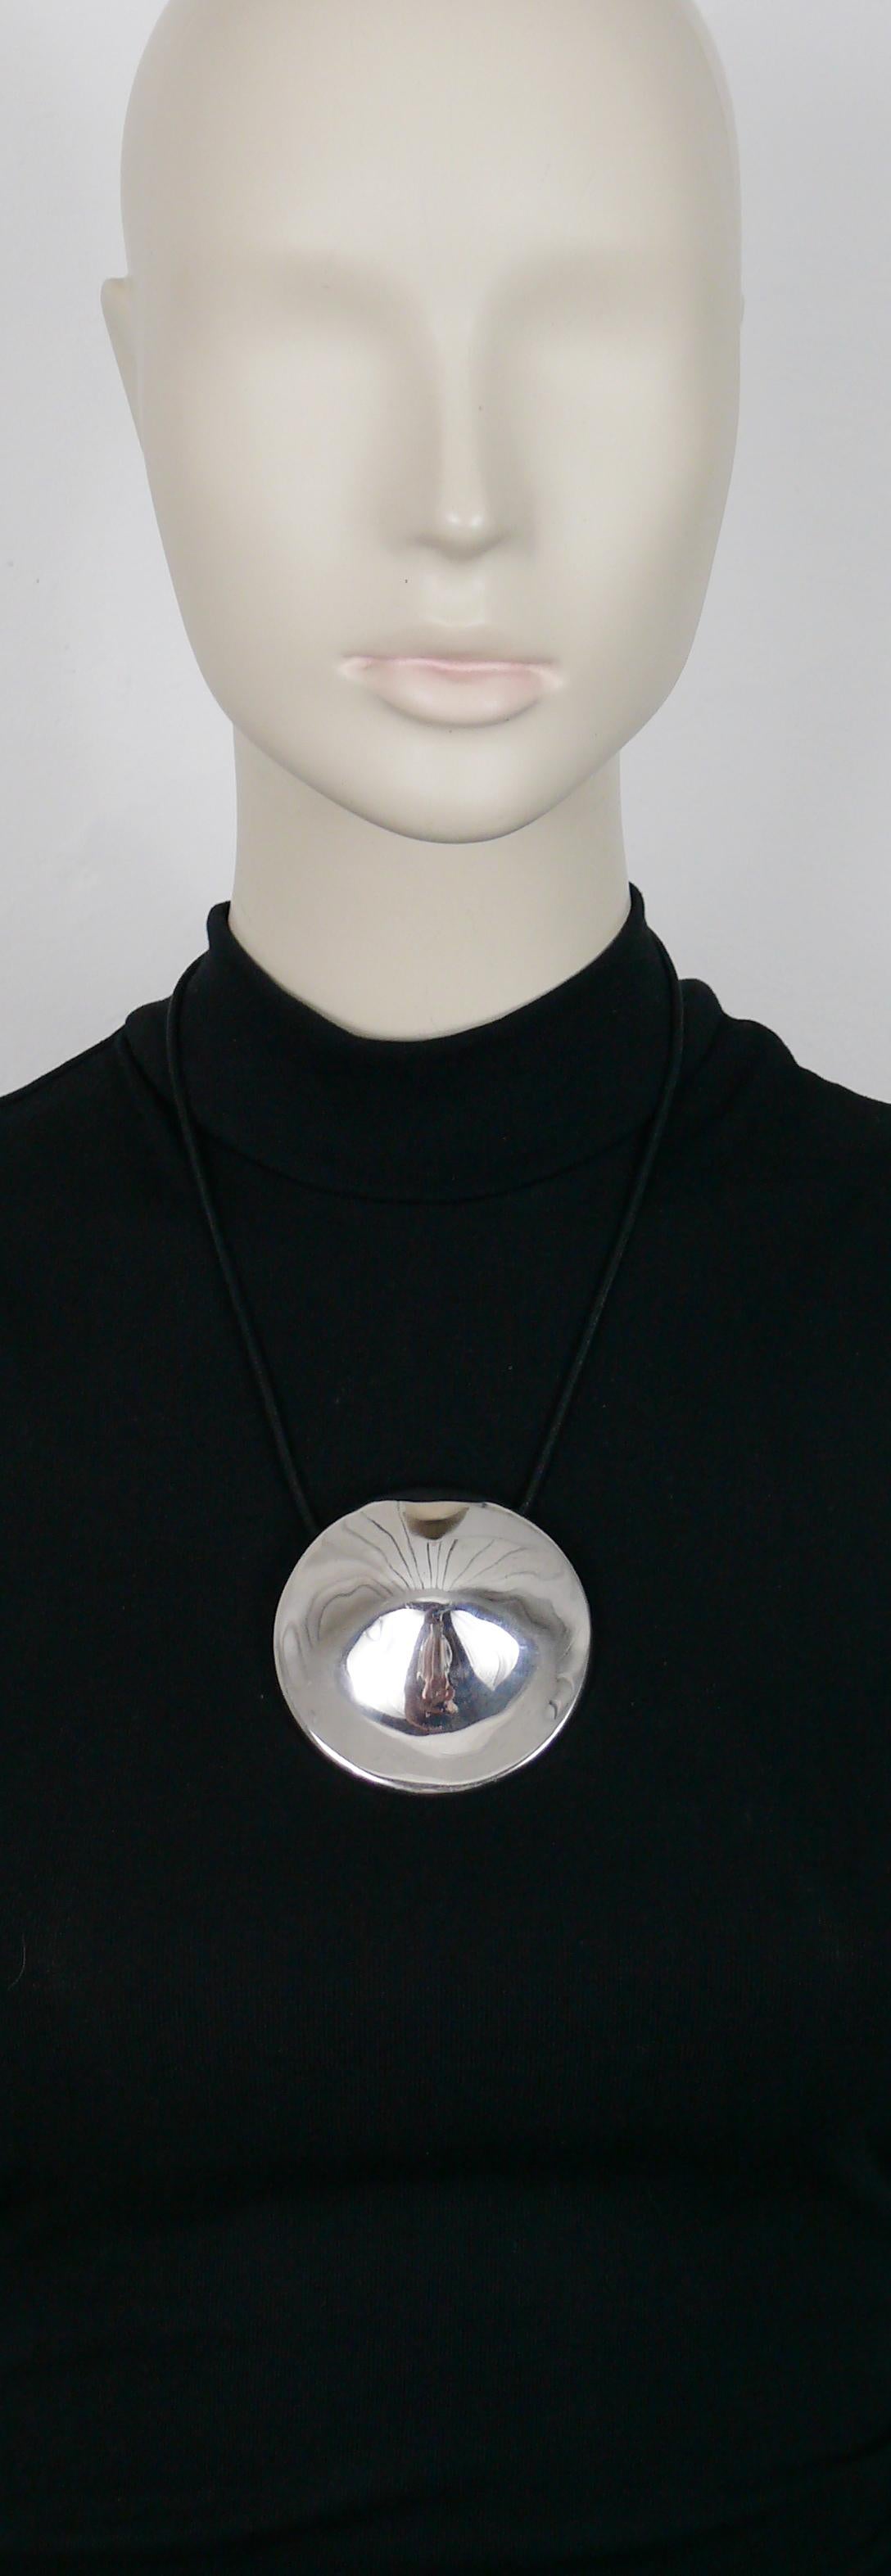 THIERRY MUGLER pendant necklace featuring a massive curved sterling silver disc with a polish finish giving a mirror effect.

Black tubular braided cord.

Embossed THIERRY MUGLER.
Fully hallmarked with French sterling silver MINERVE head hallmark